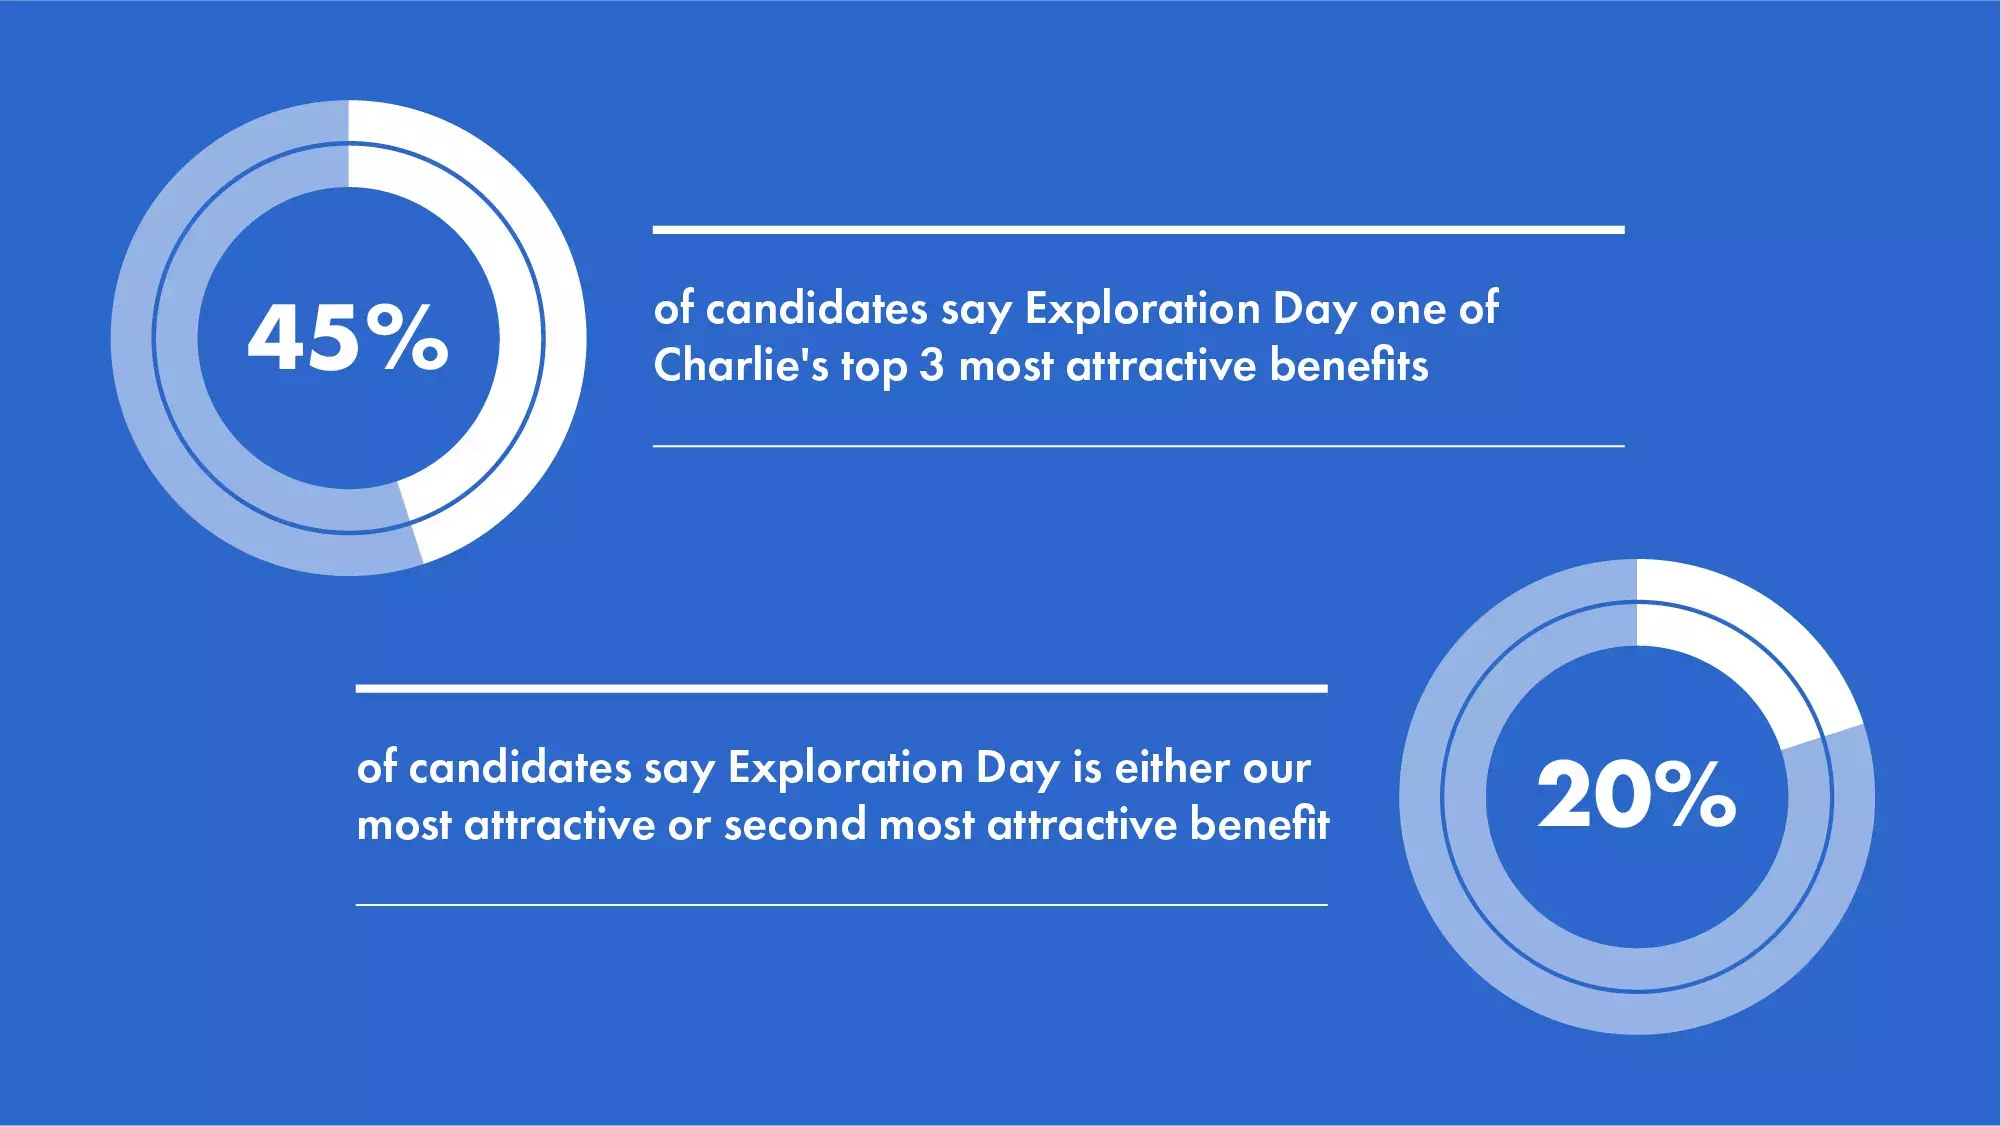 Infographic: 45% of candidates say Exploration Days one of Charlie's top 3 benefits